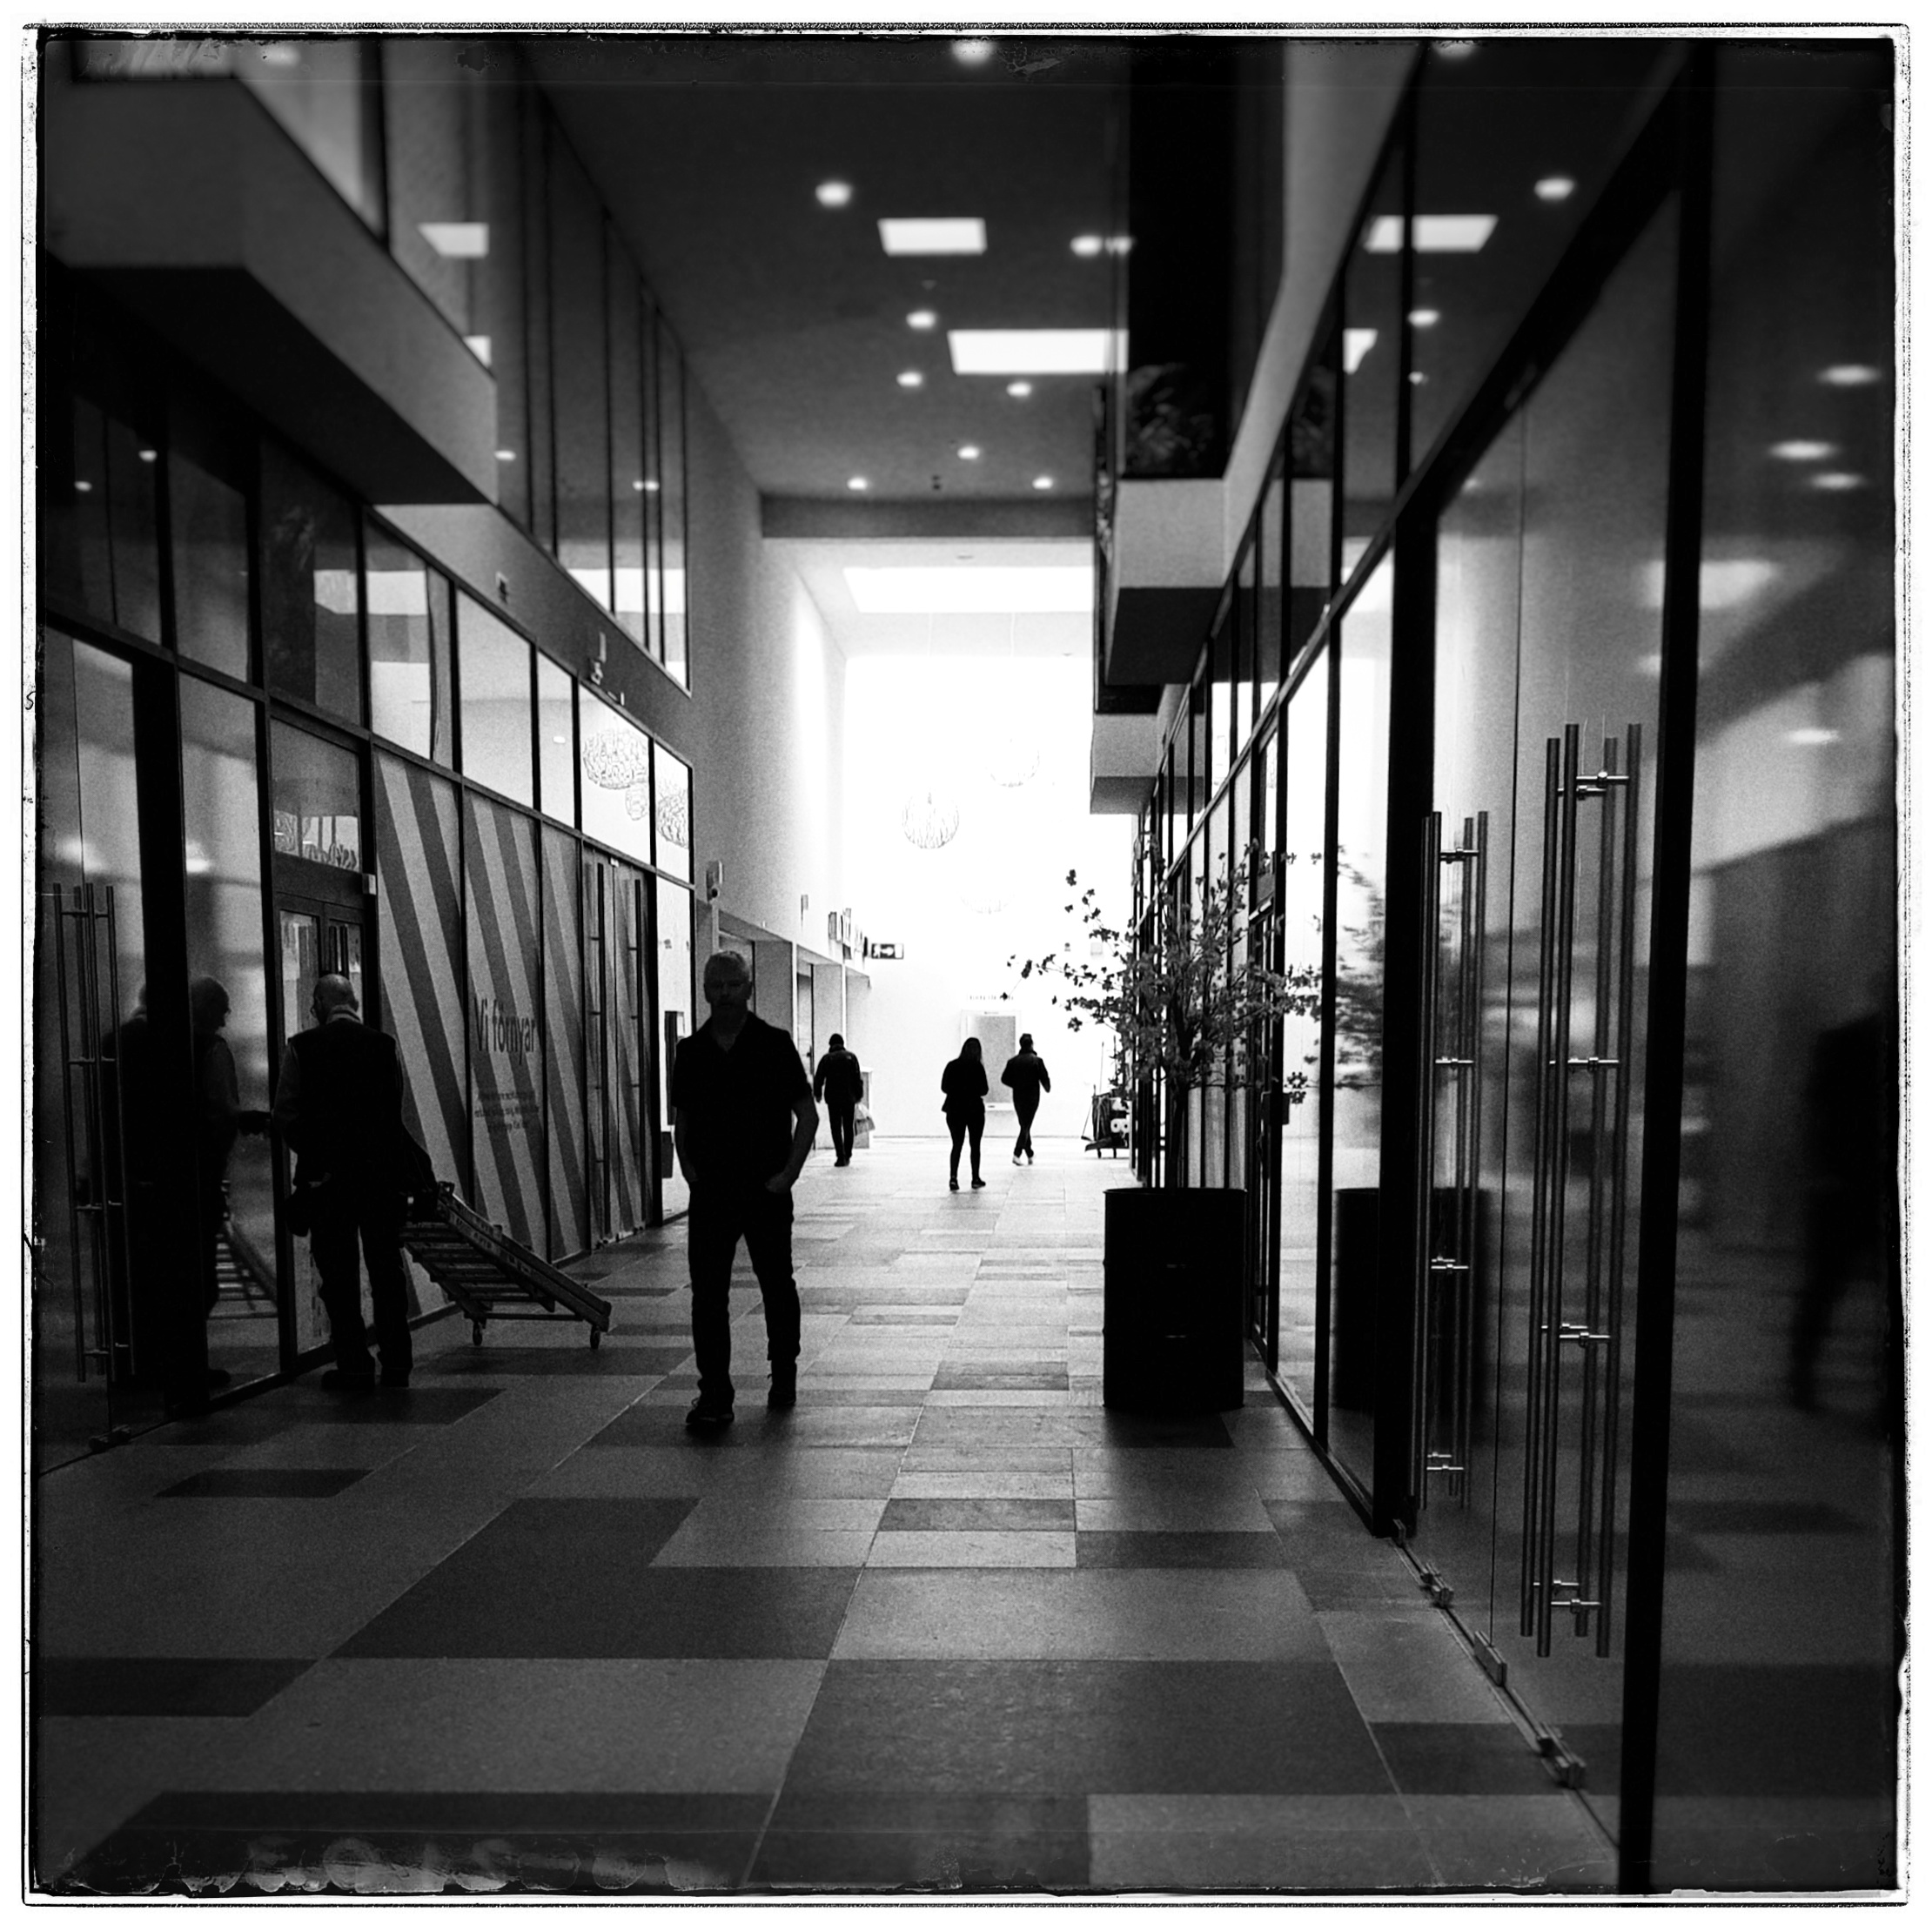 Day 111 - April 21: Shoppers